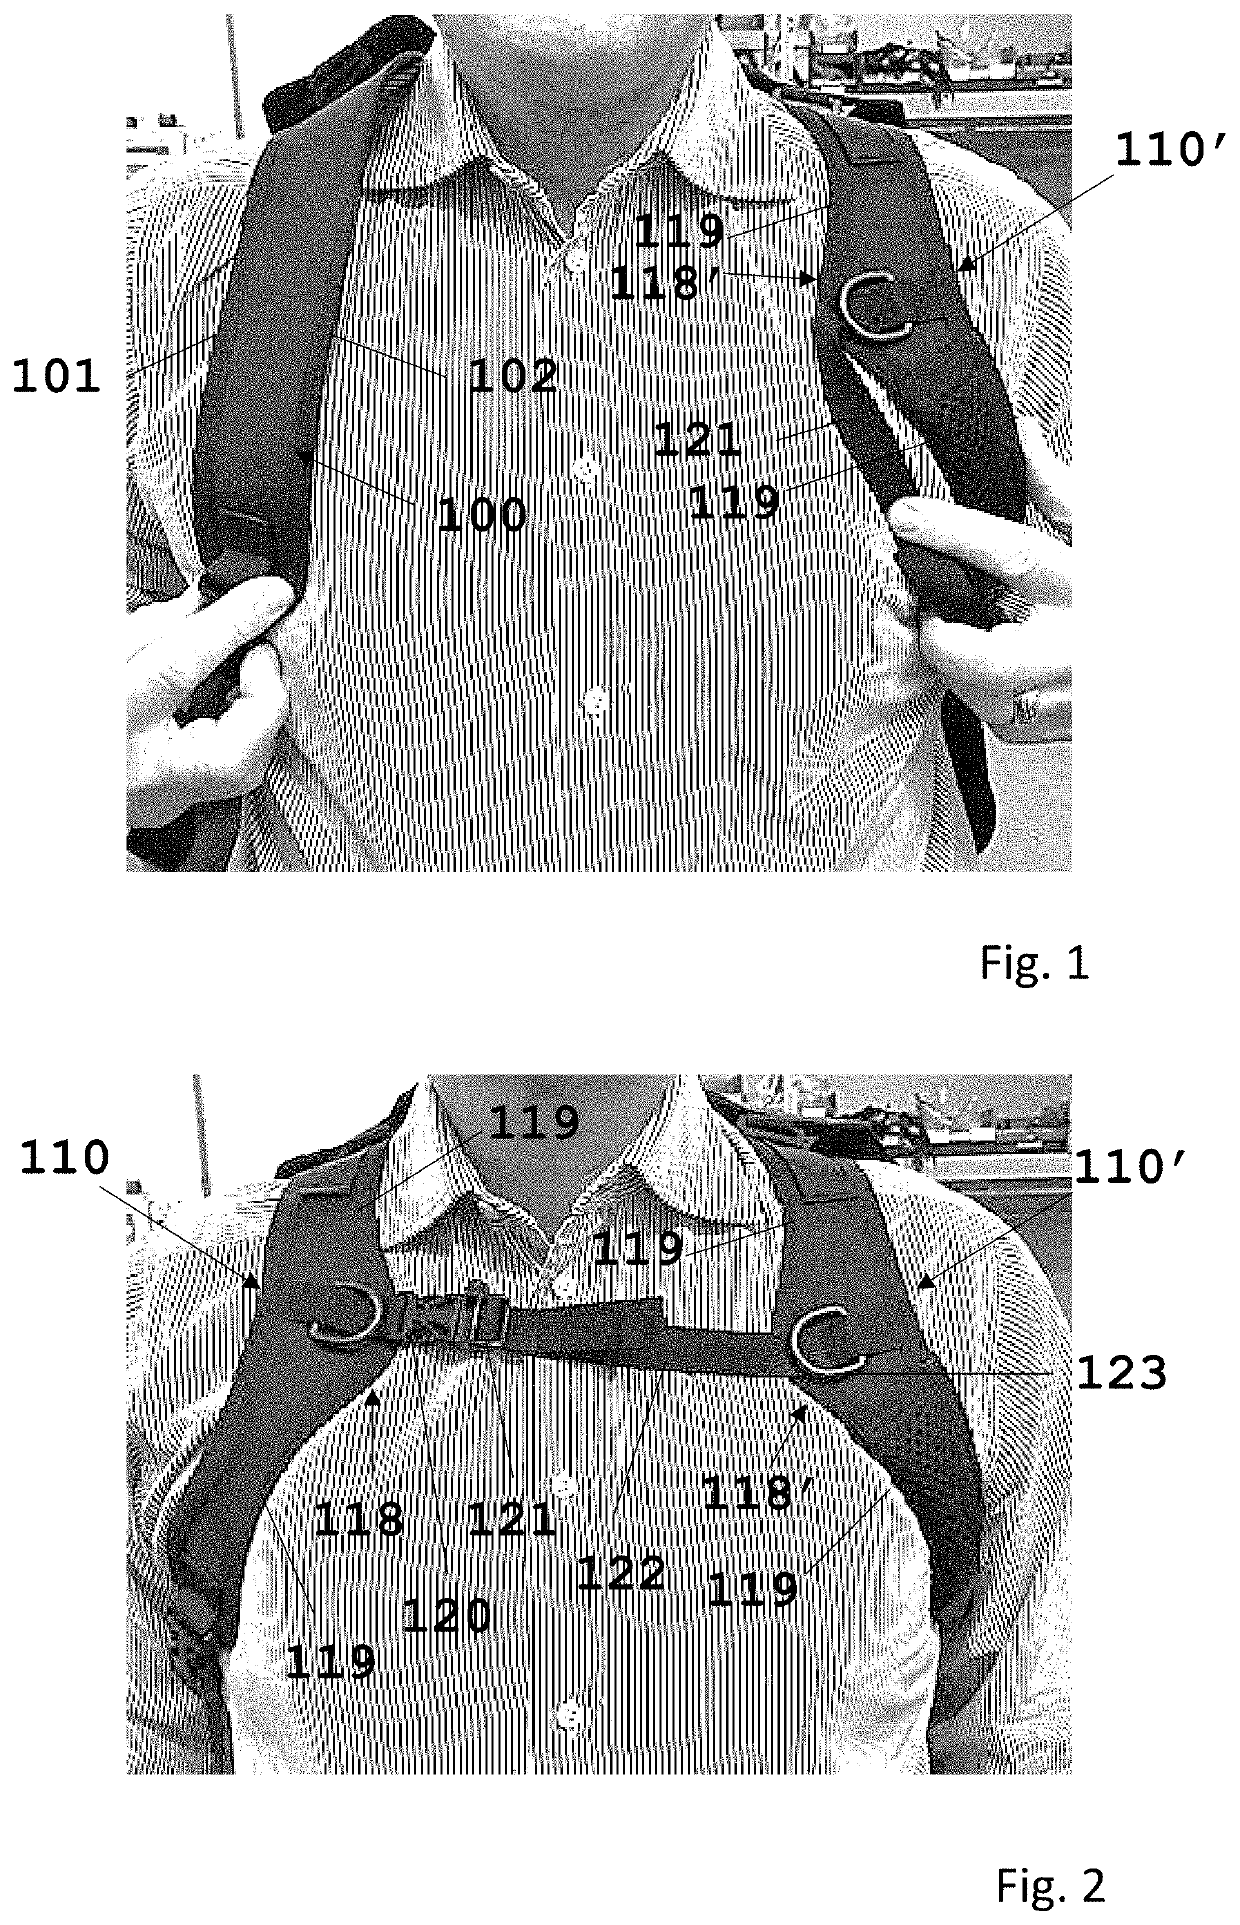 Shoulder strap for supporting back loads, device for carrying back loads, and in particular buoyancy compensator, or the like